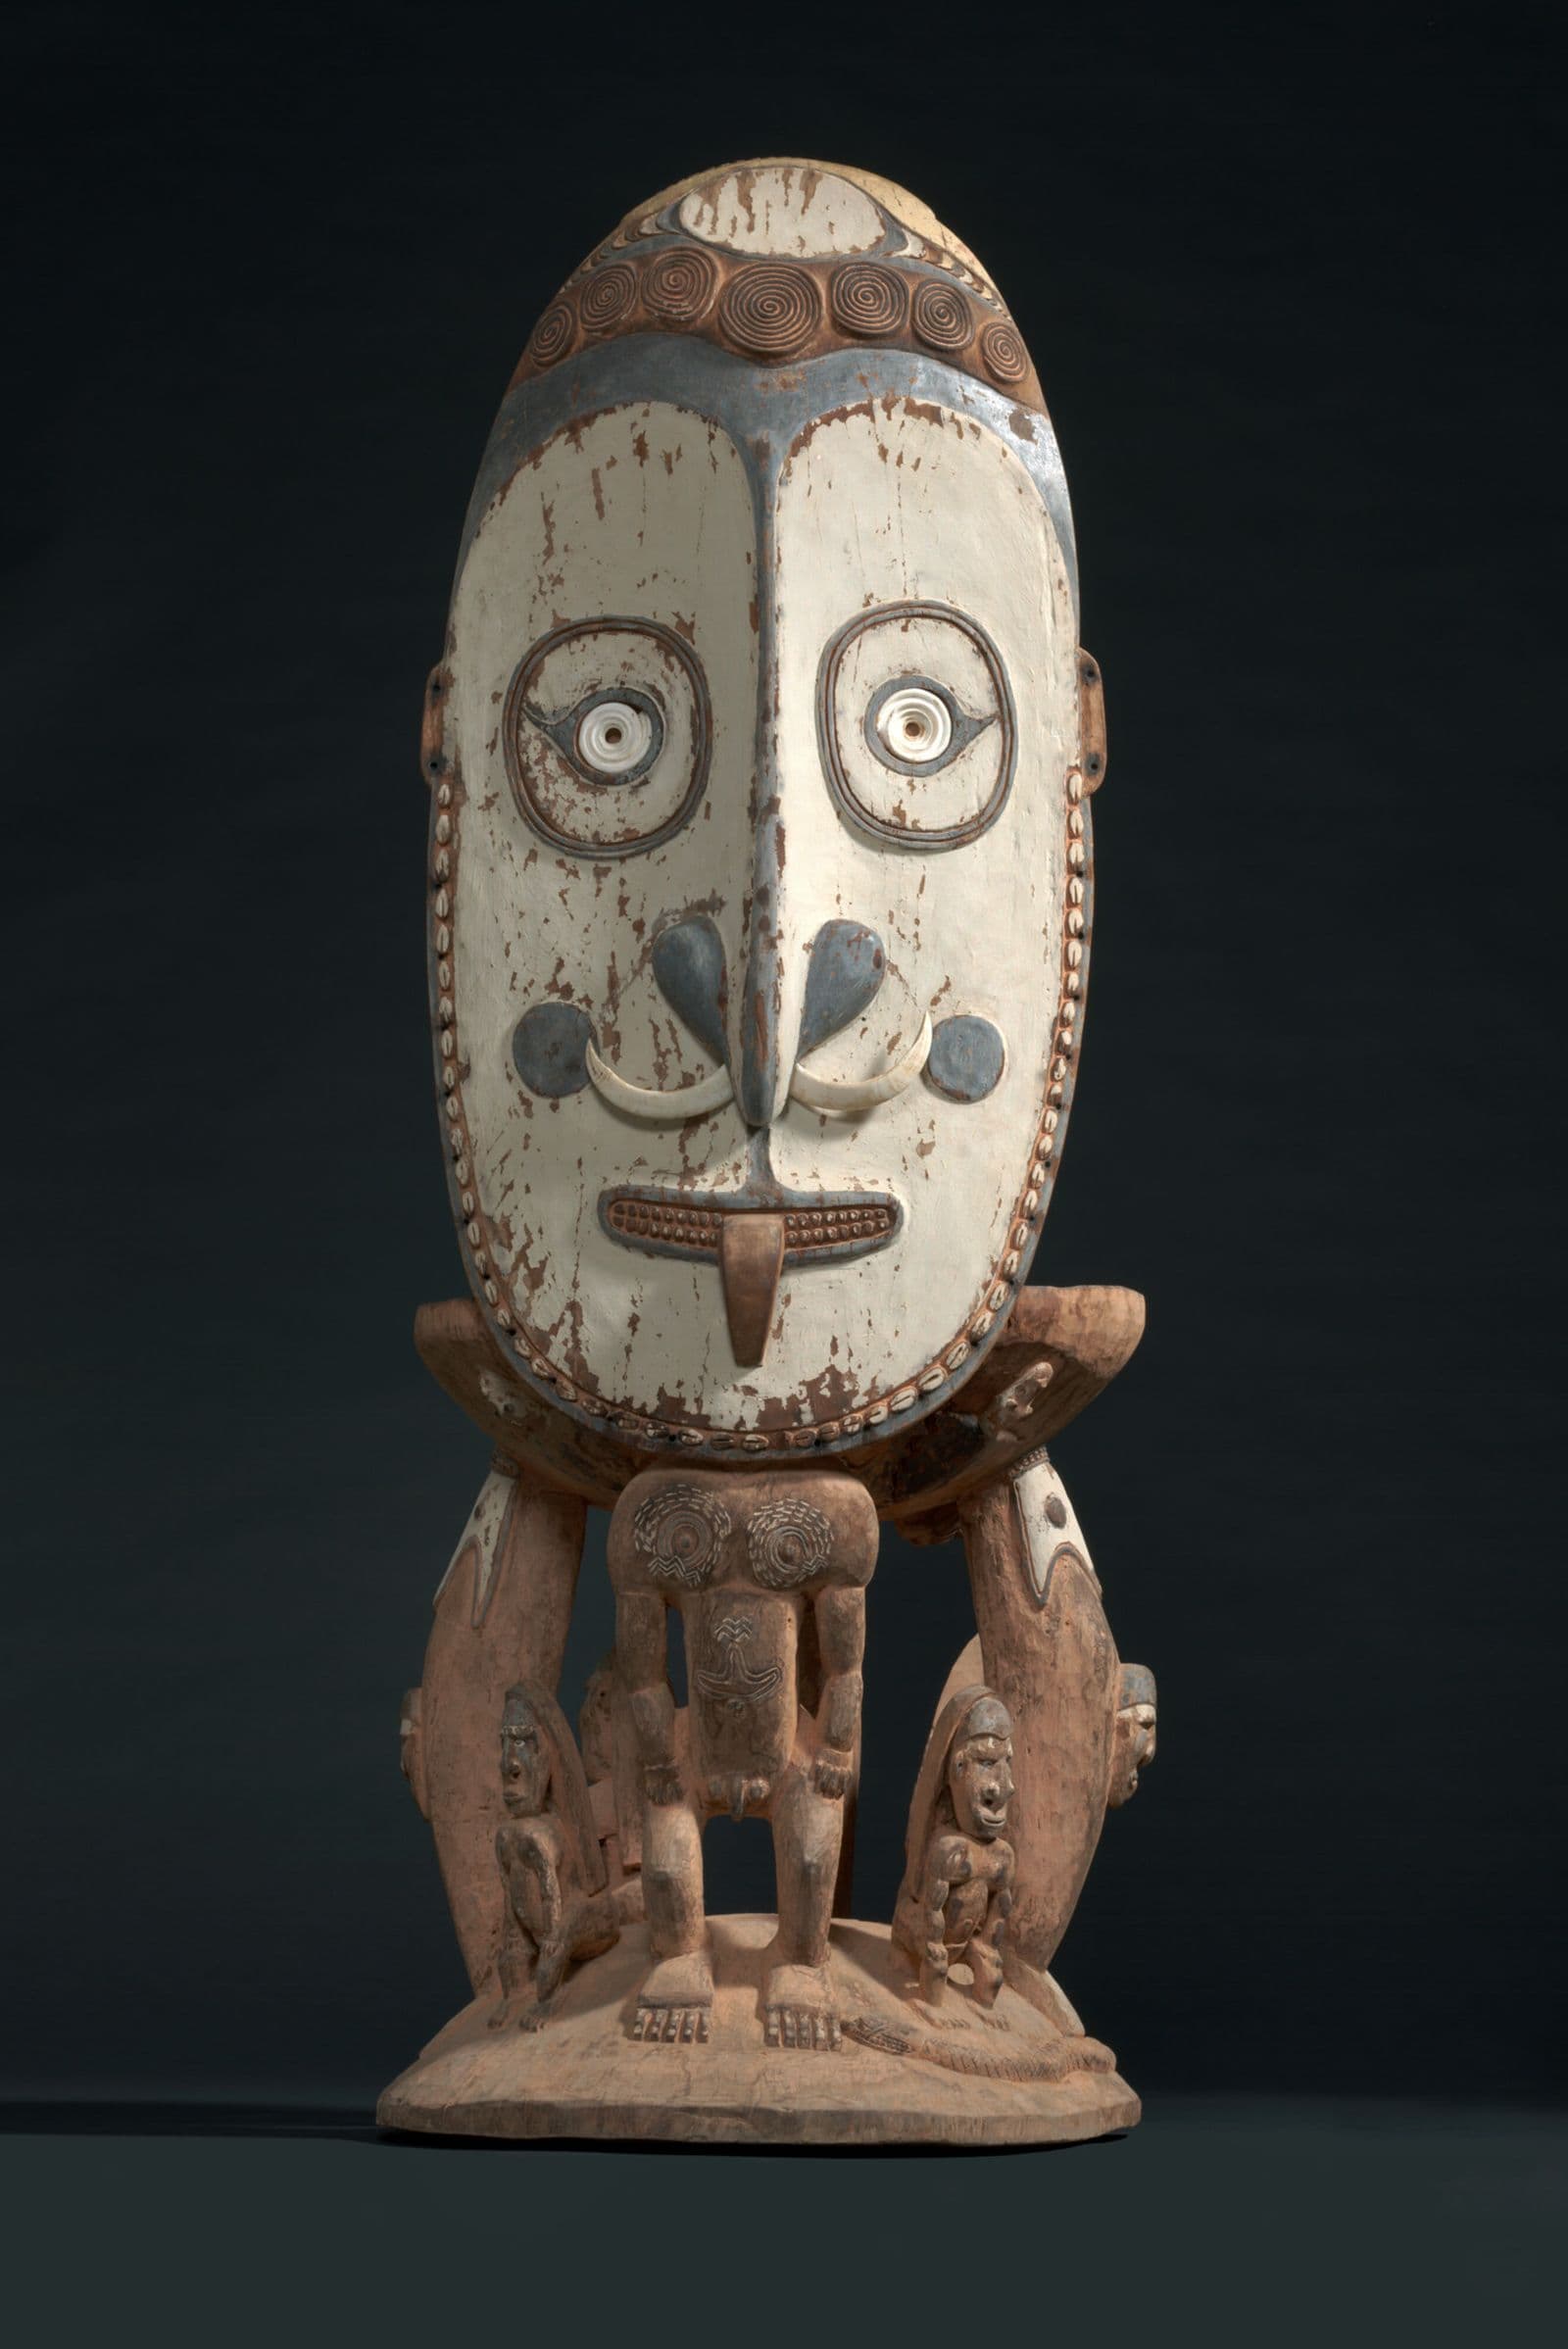 Stool backing with traditional figure with oversized head, facial decoration and paint, two smaller figures lie at base